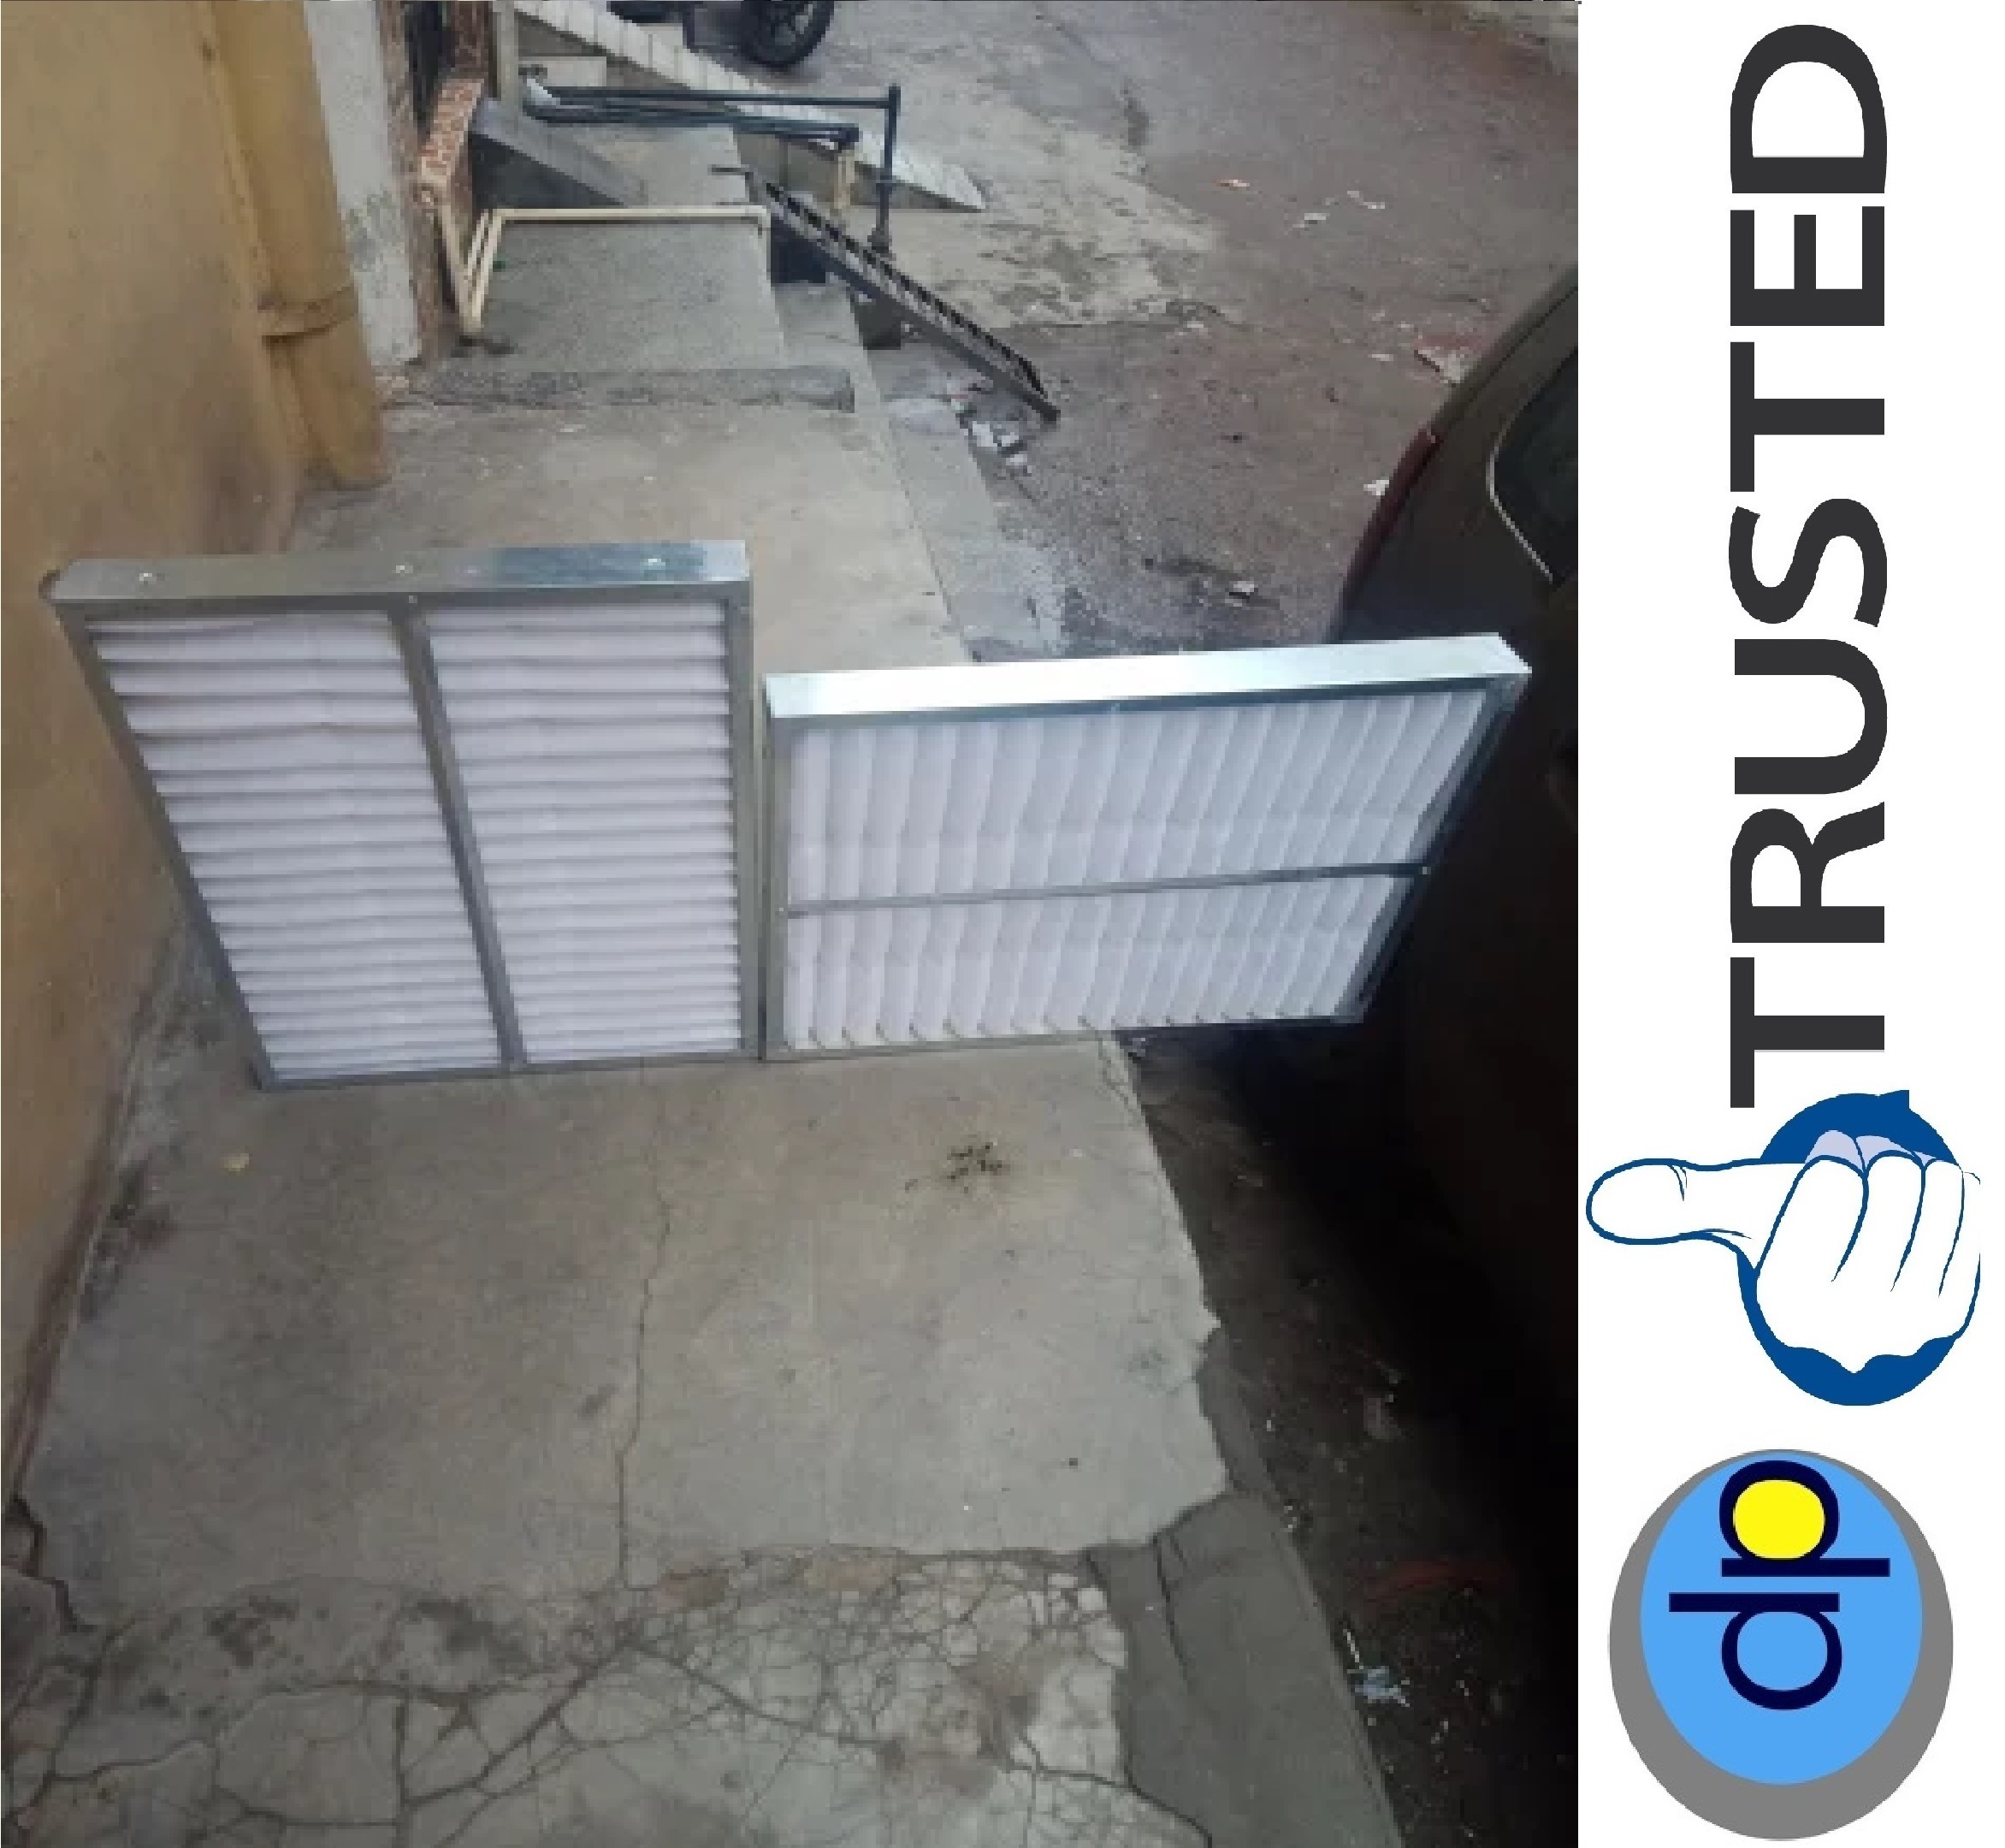 Leading Supplier of AHU (Air Handling Unit) Filters for Hyderabad Telangana